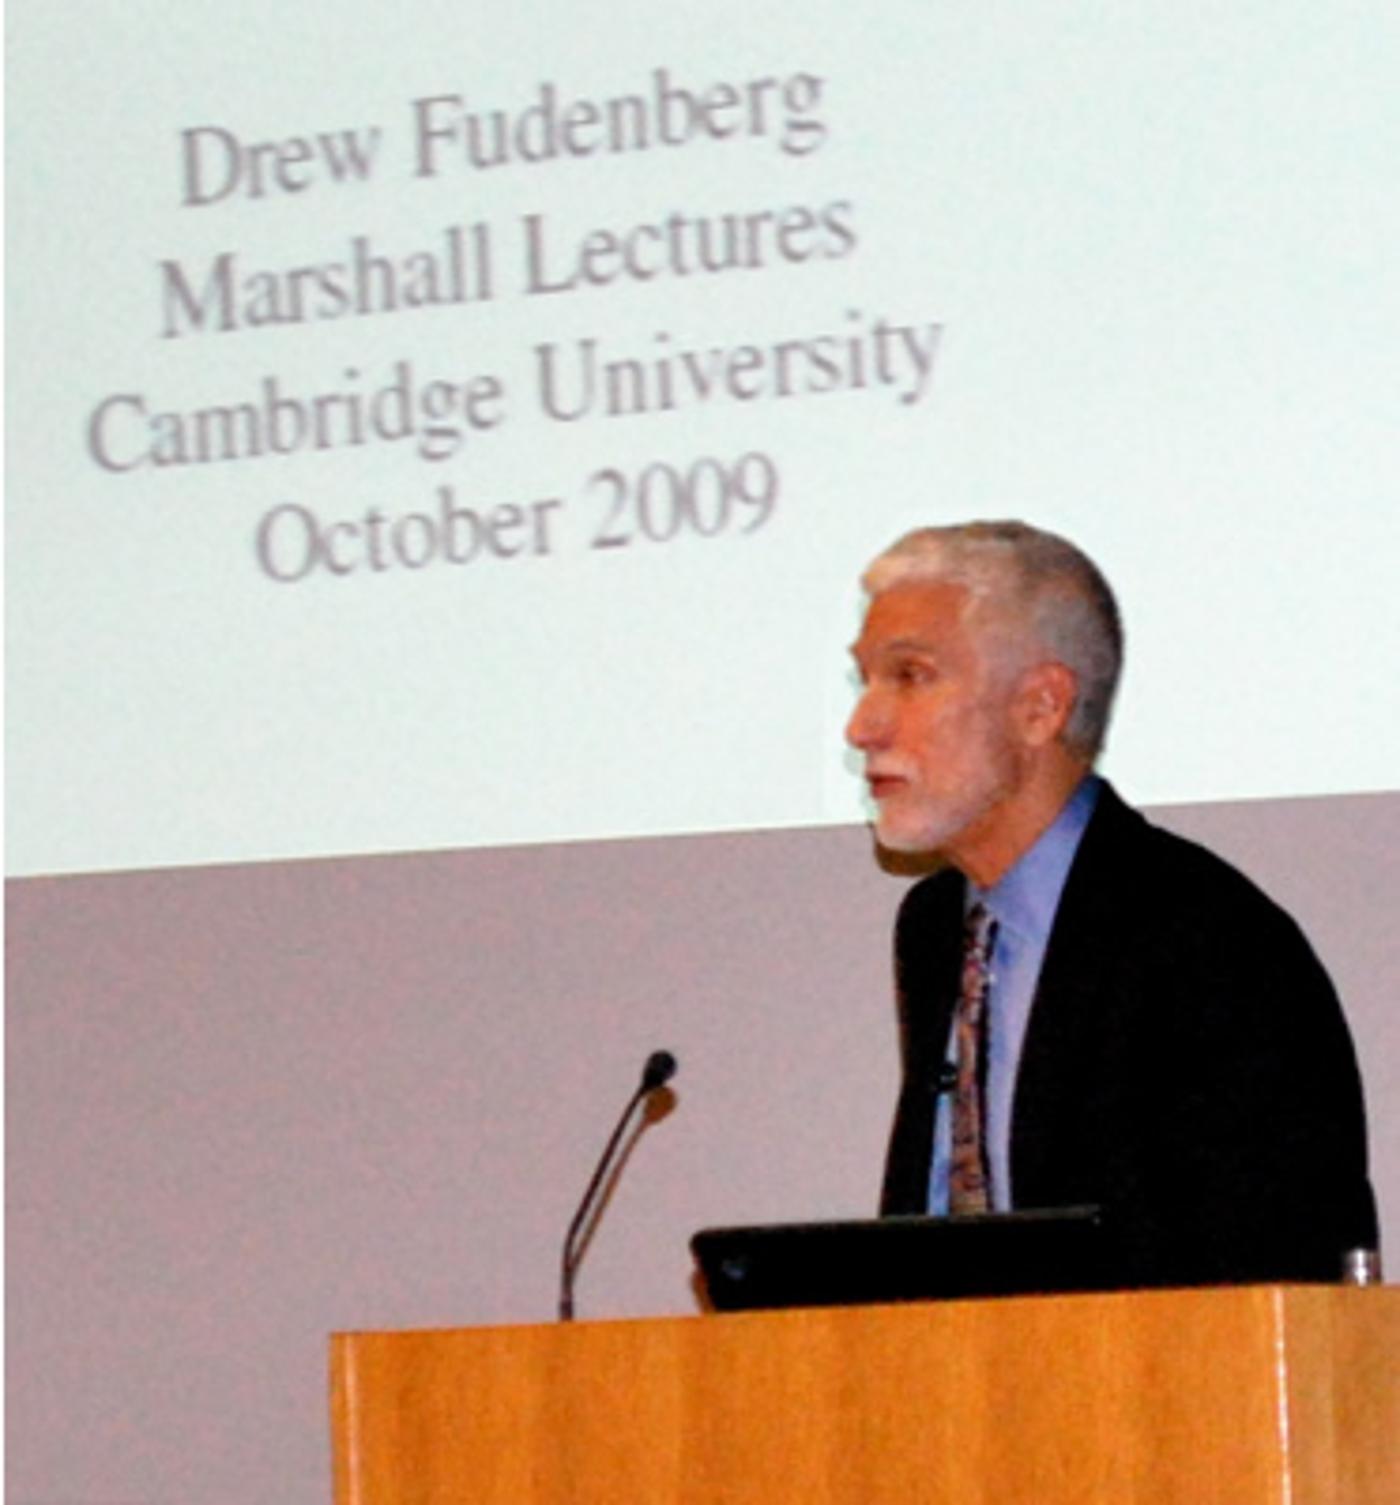 Marshall Lectures 2009 - Professor Drew Fudenberg - Learning and Equilibrium in Games - Lecture 2 - Video